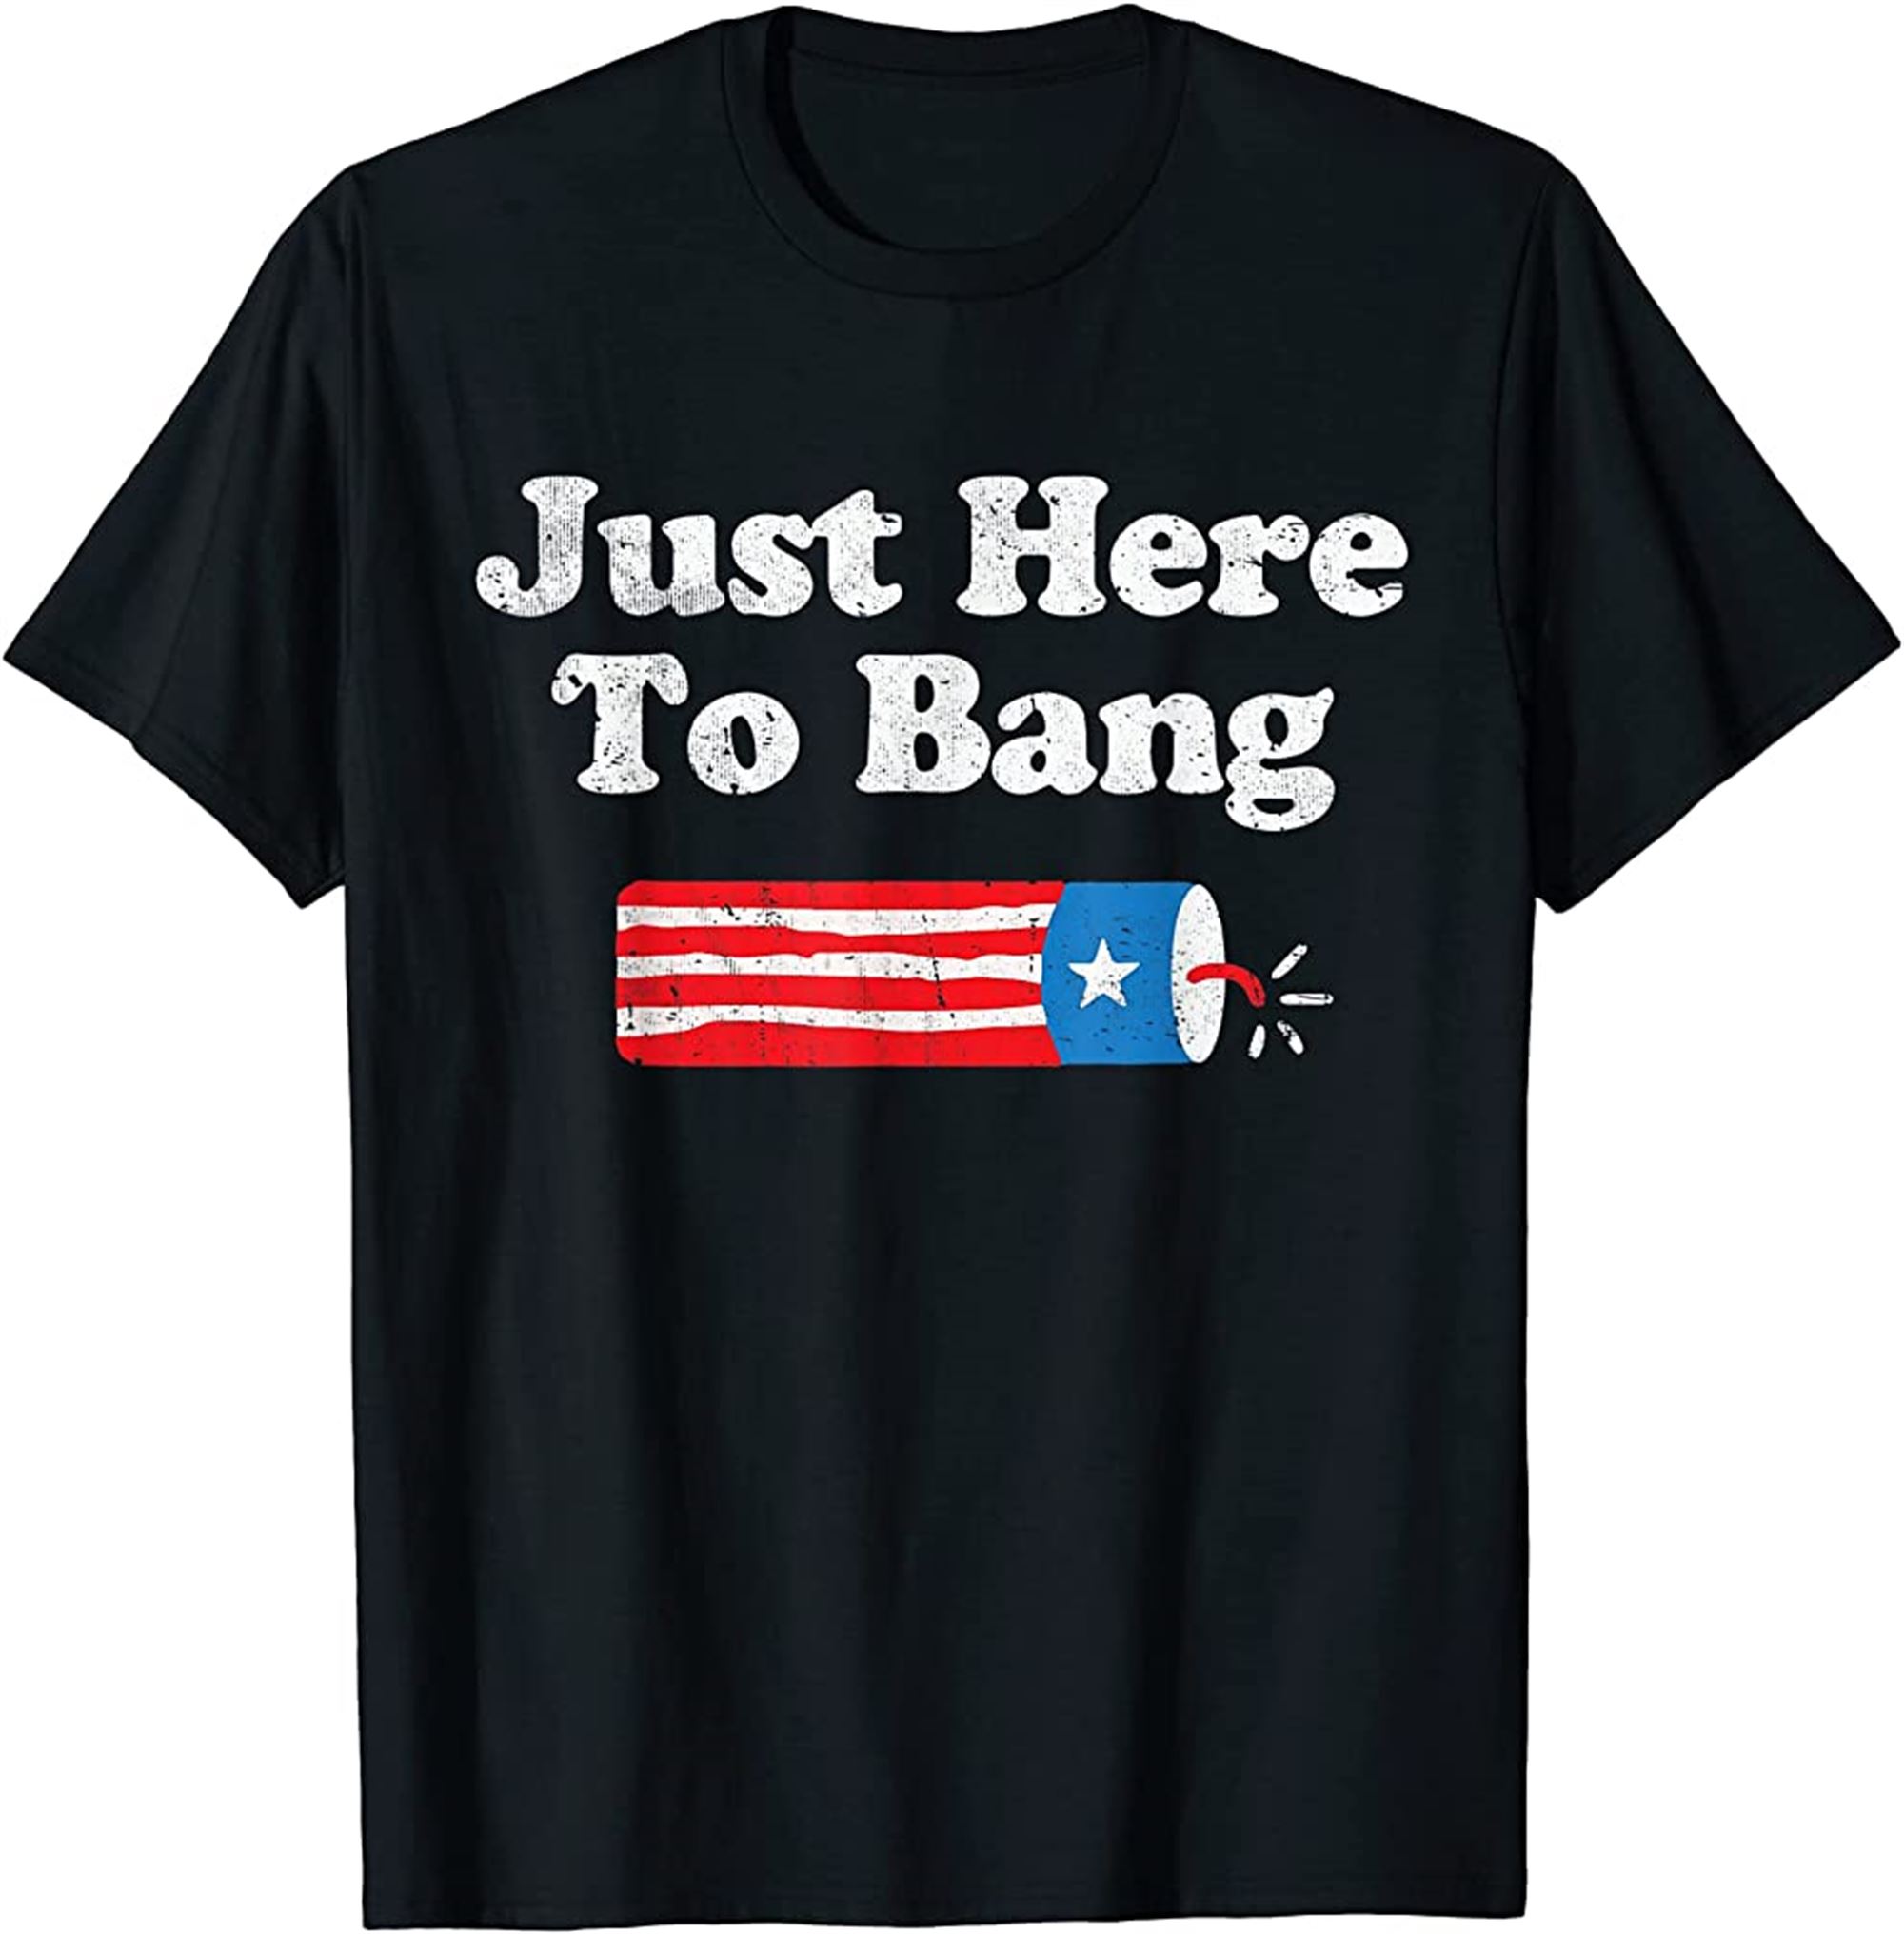 Just Here To Bang American Flag Fireworks Funny 4th Of July T-shirt Plus Size Up To 5xl